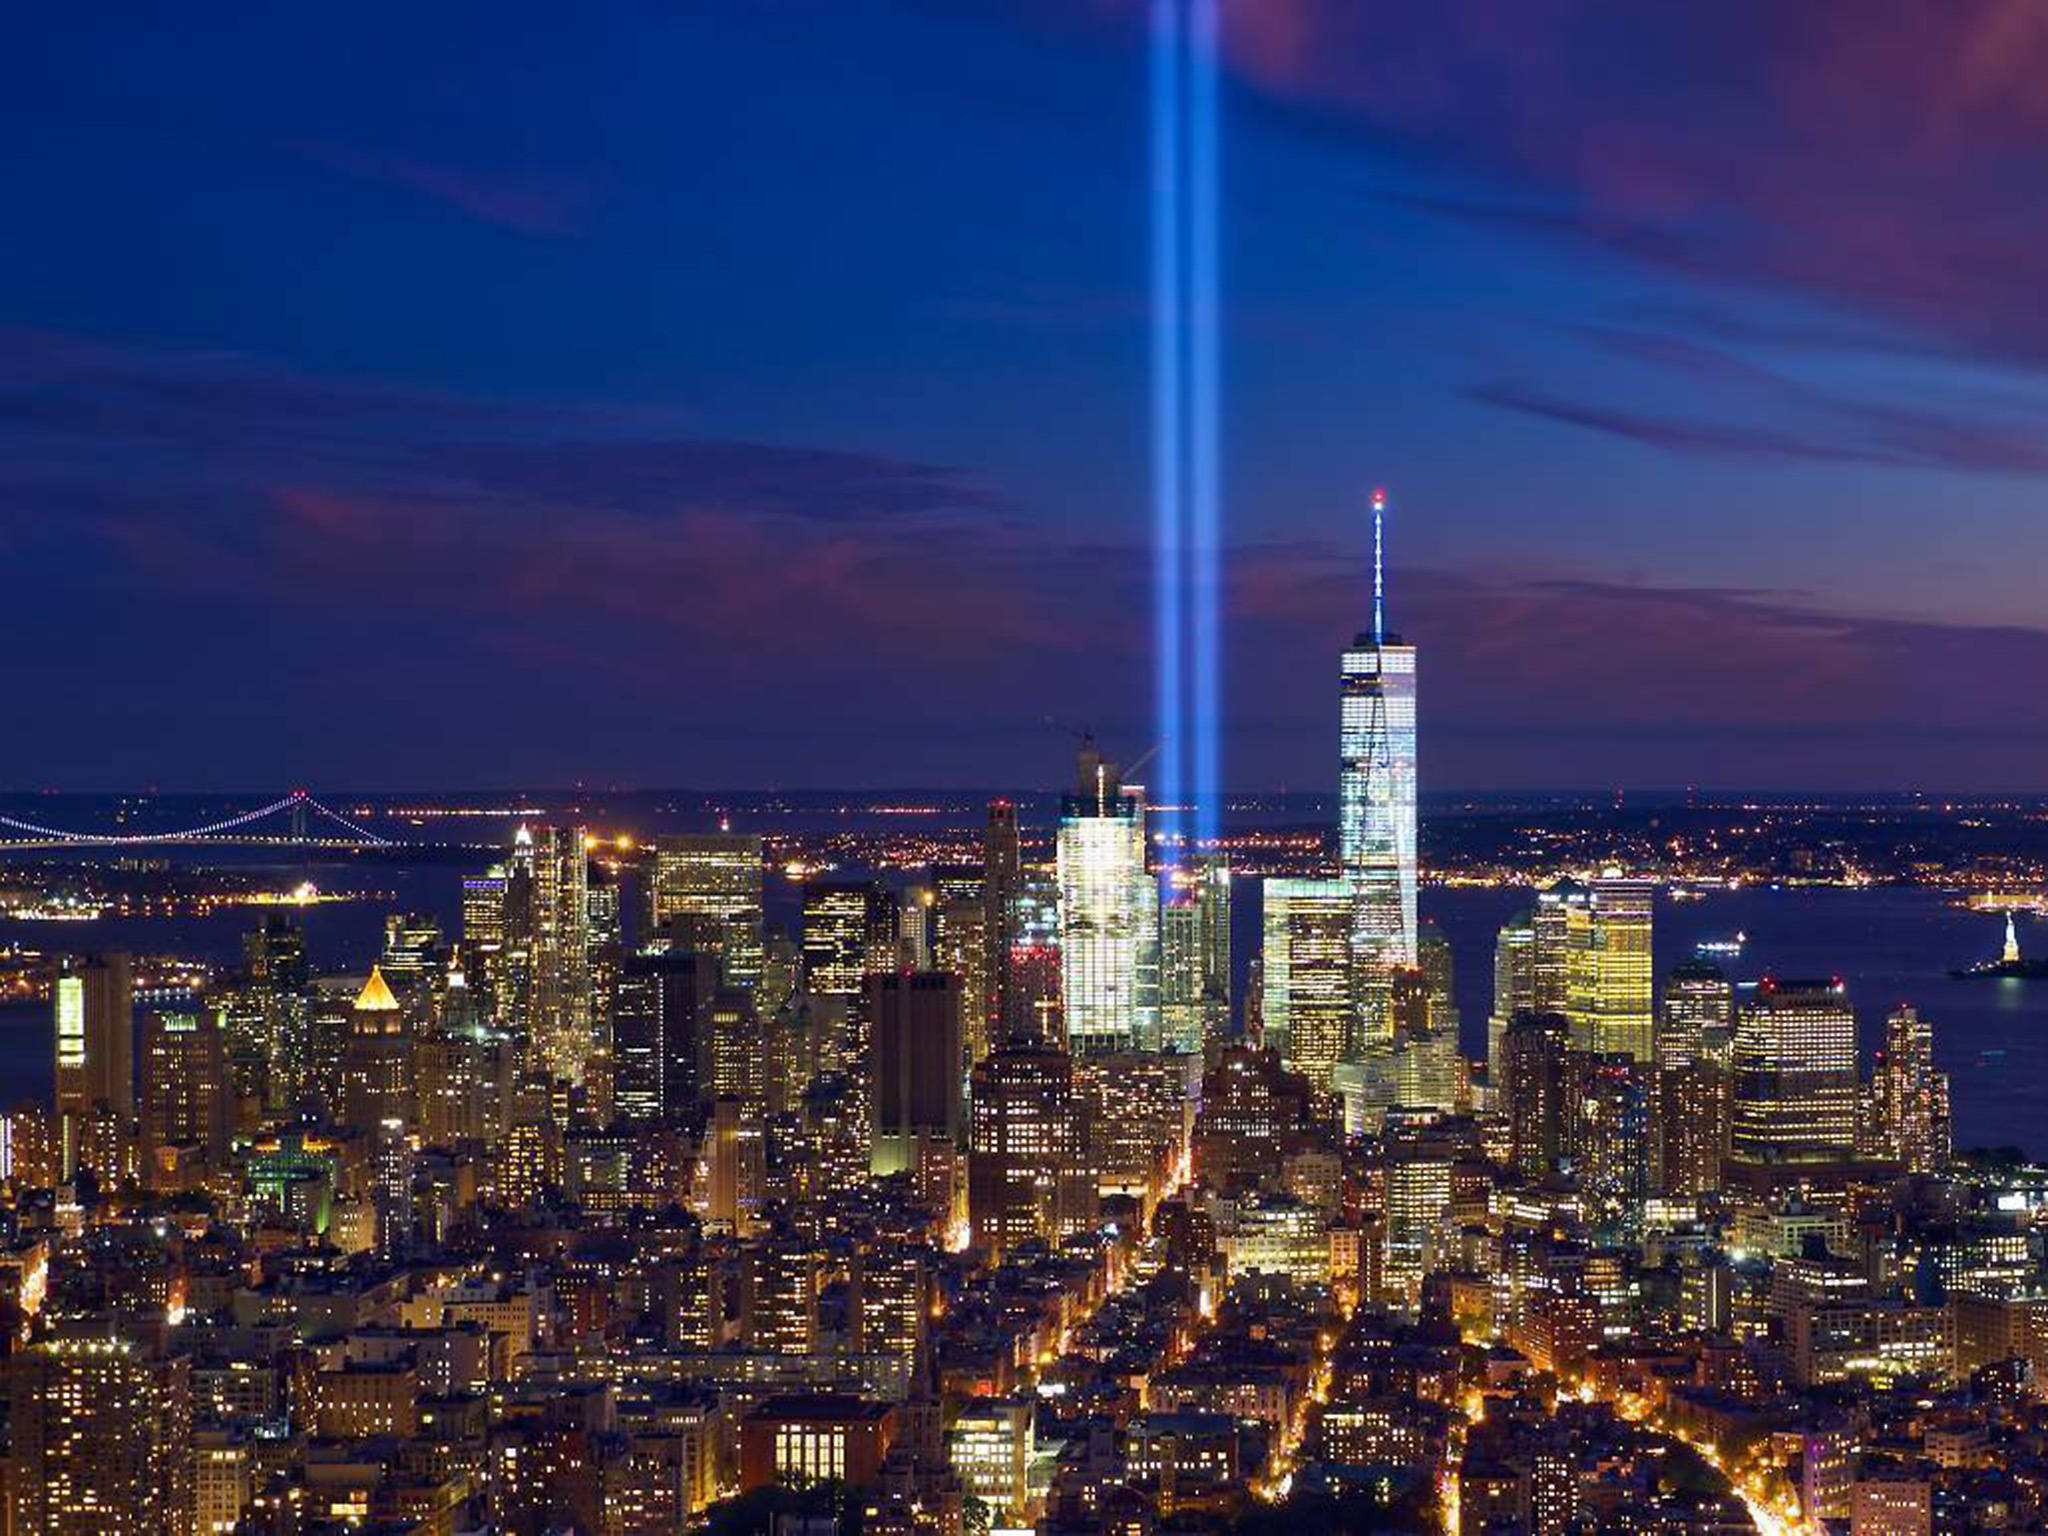 9/11 anniversary events in NYC